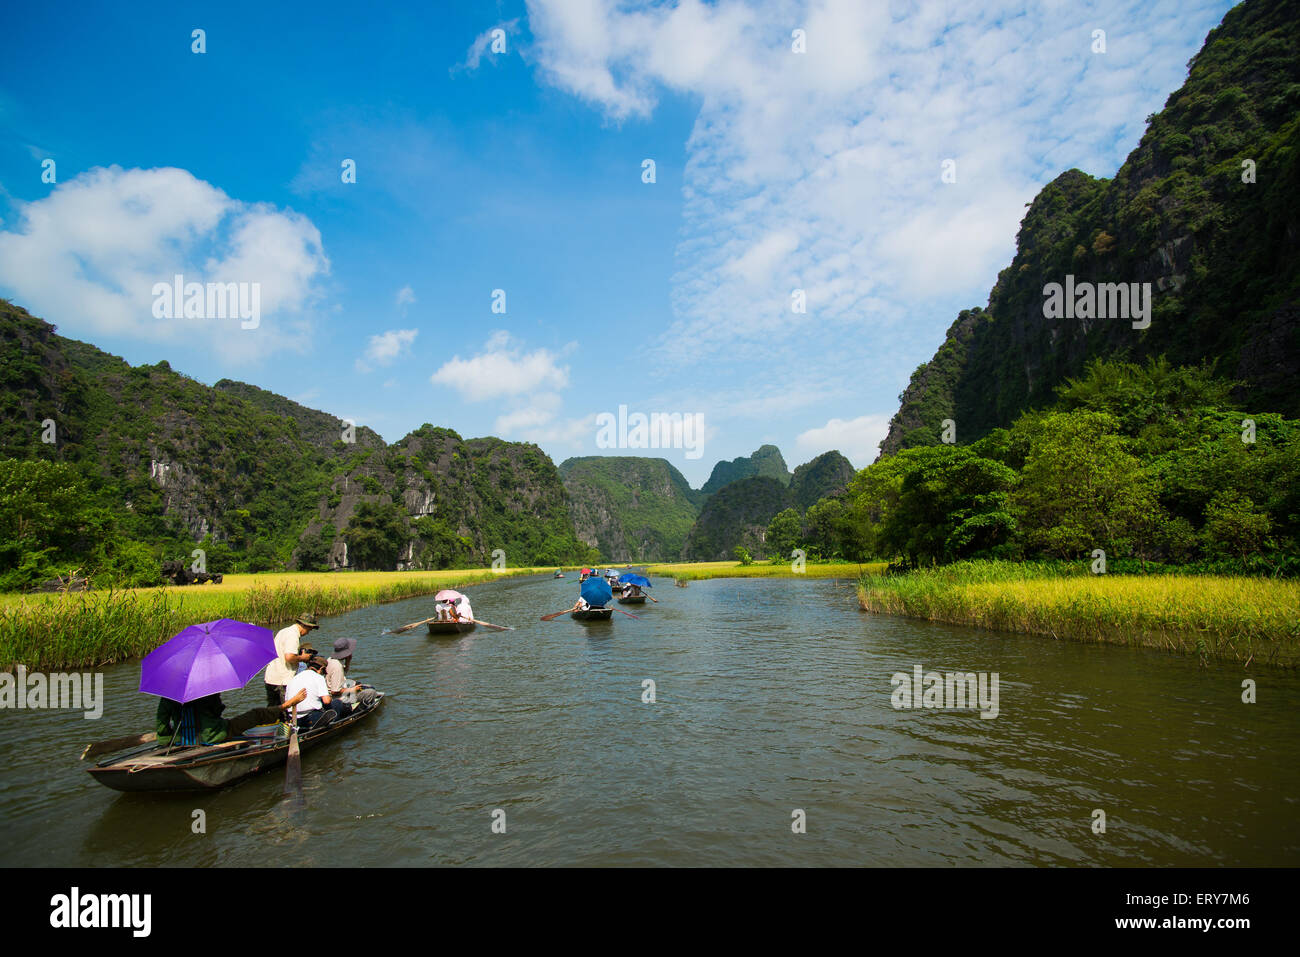 Visitors on boat visit rice field and river in TamCoc, NinhBinh, Vietnam Stock Photo